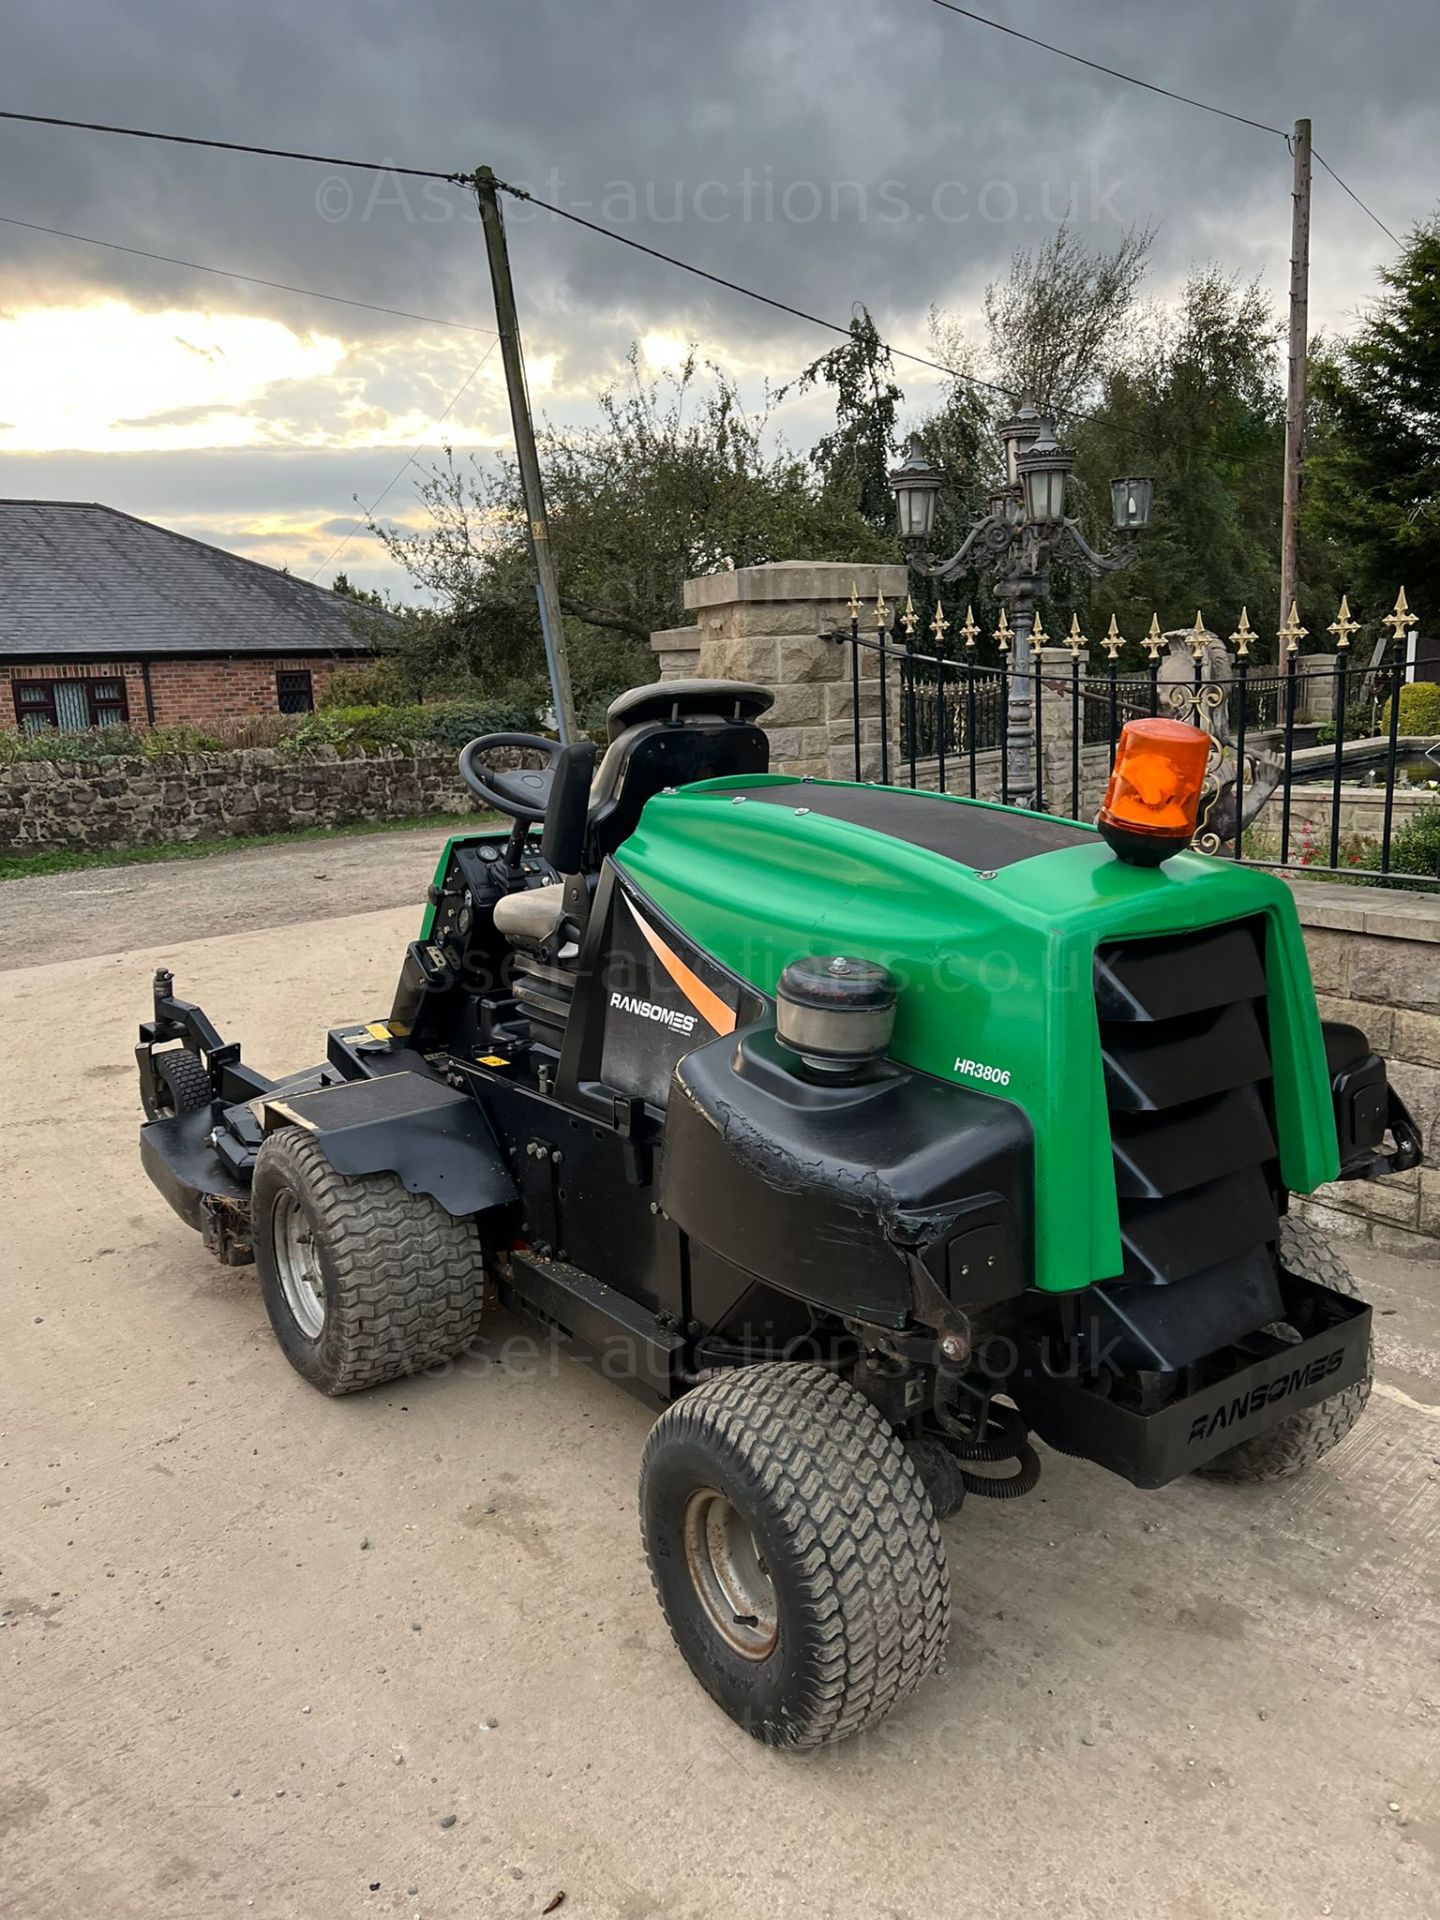 RANSOMES HR3806 RIDE ON LAWN MOWER, RUNS WORKS AND CUTS, 814 RECORDED HOURS, 4 WHEEL DRIVE *NO VAT* - Image 4 of 8